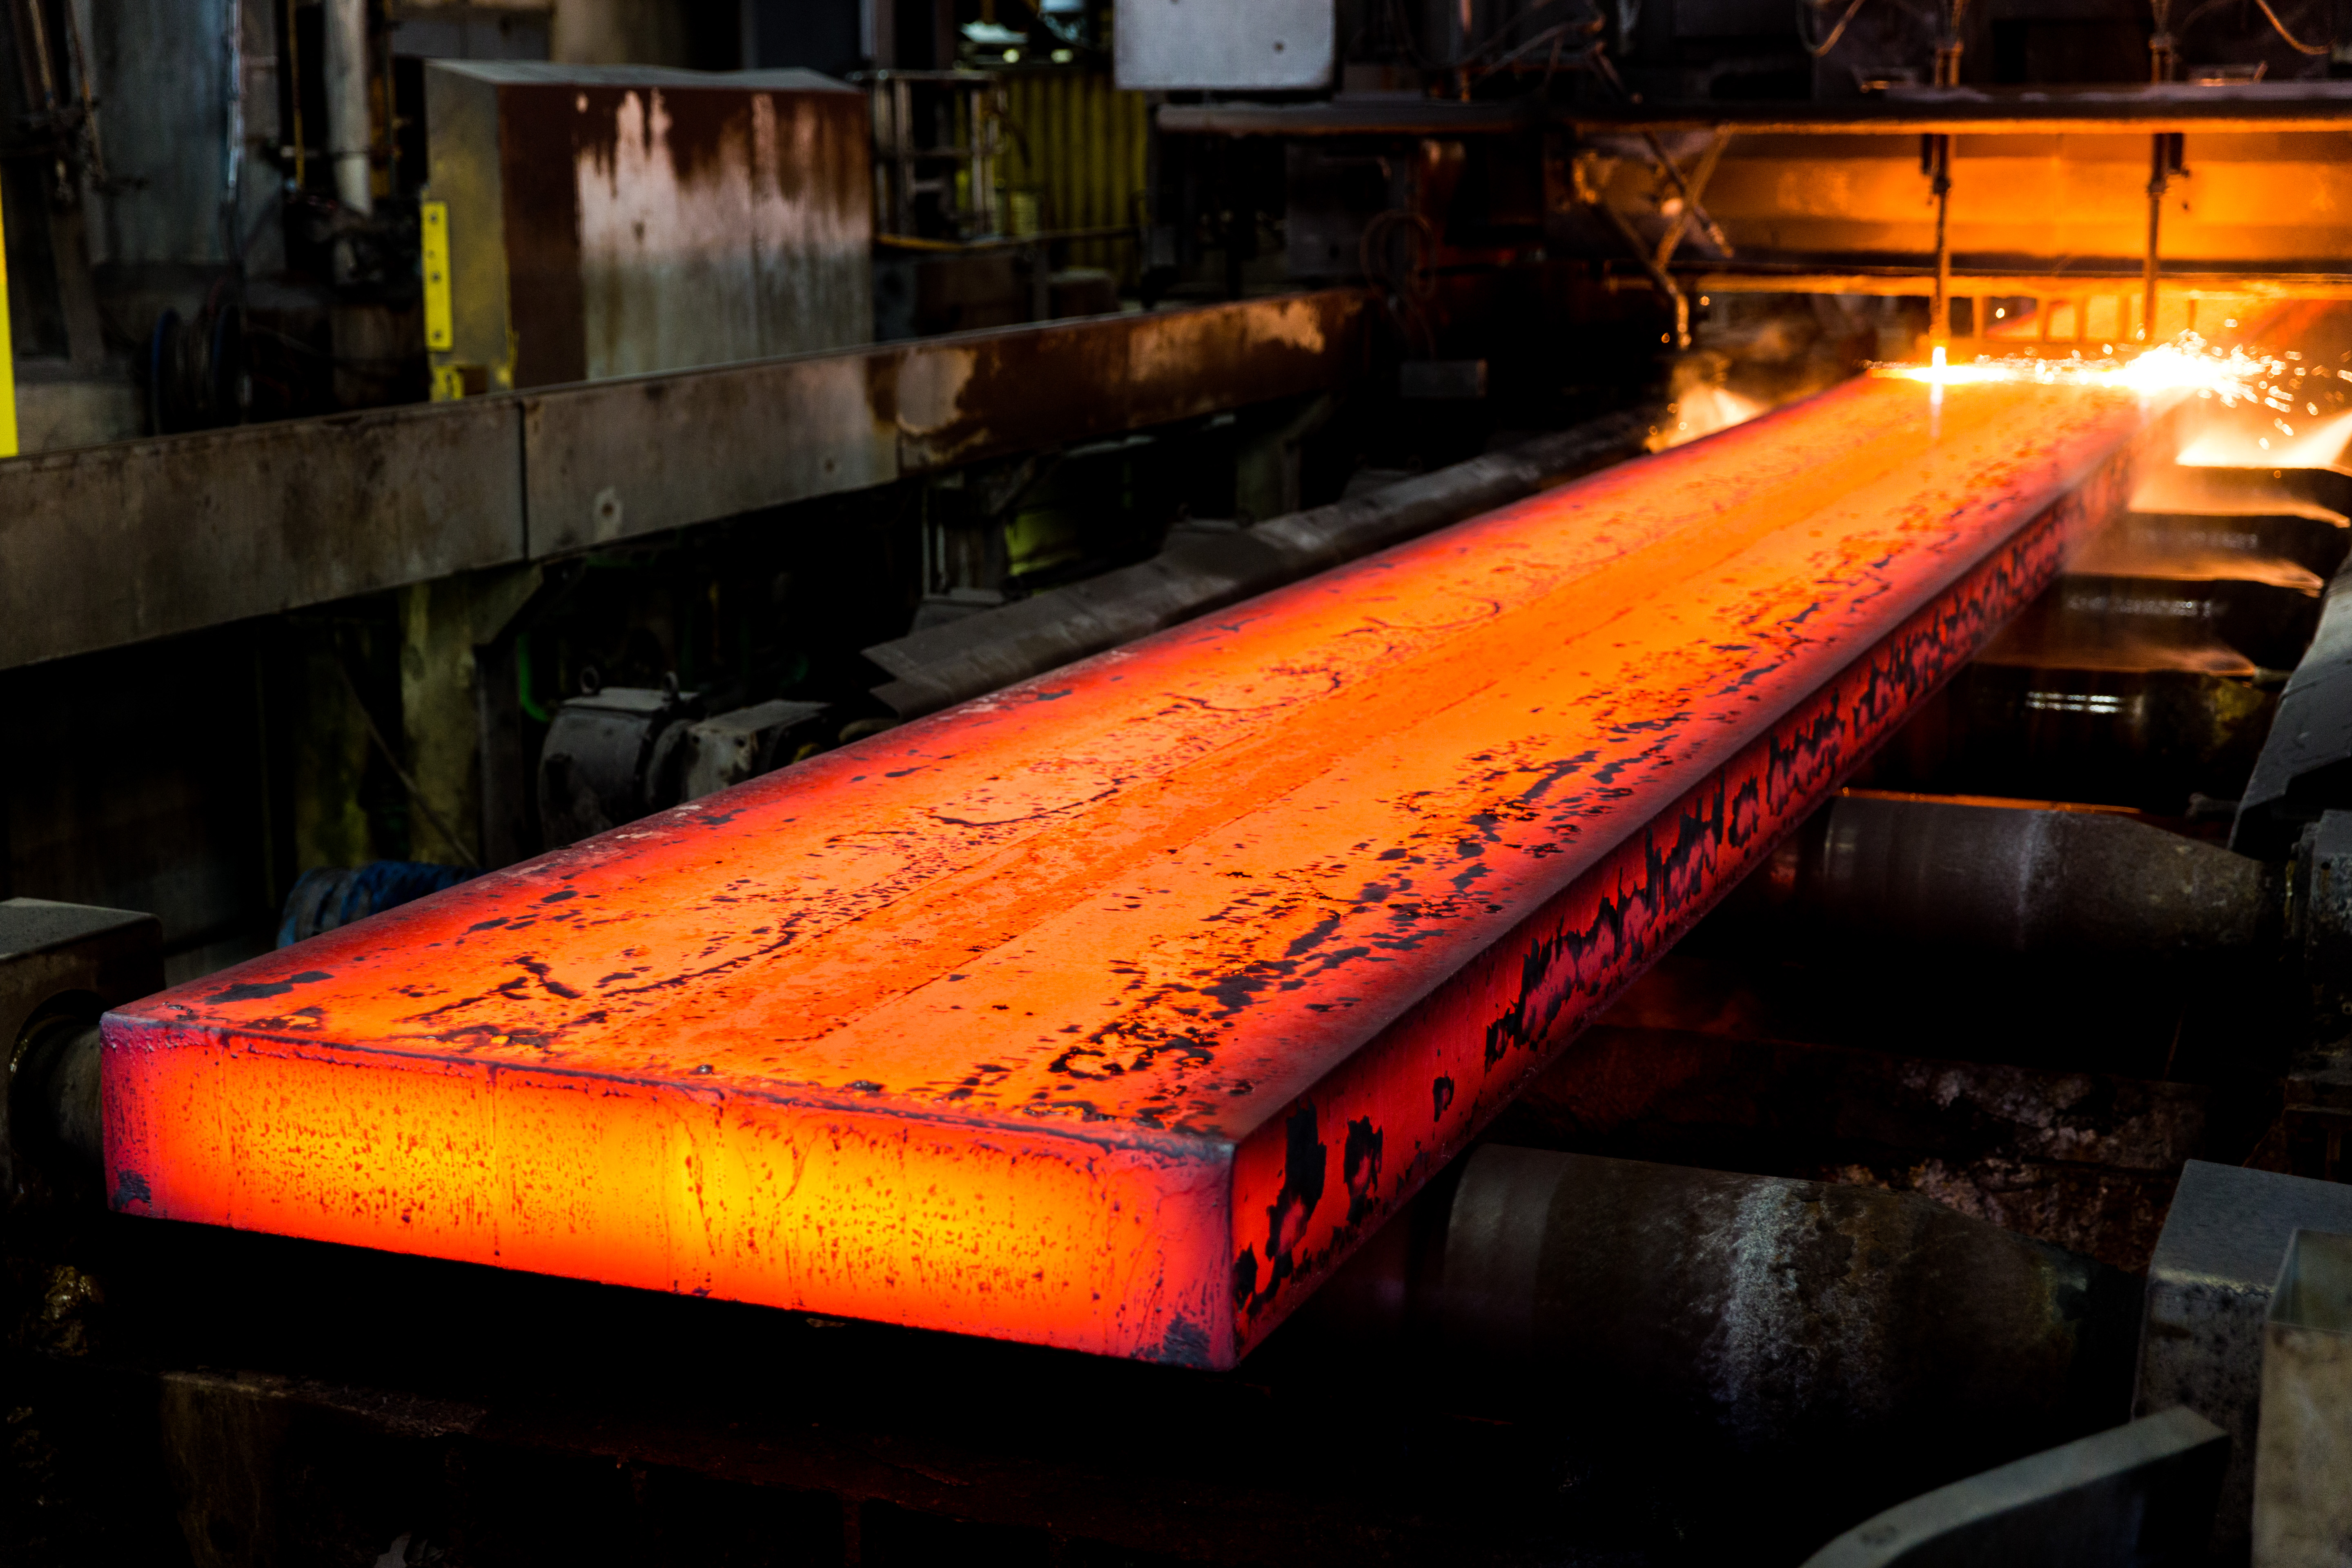 Simulation Takes the Heat off Tata Steel During Production